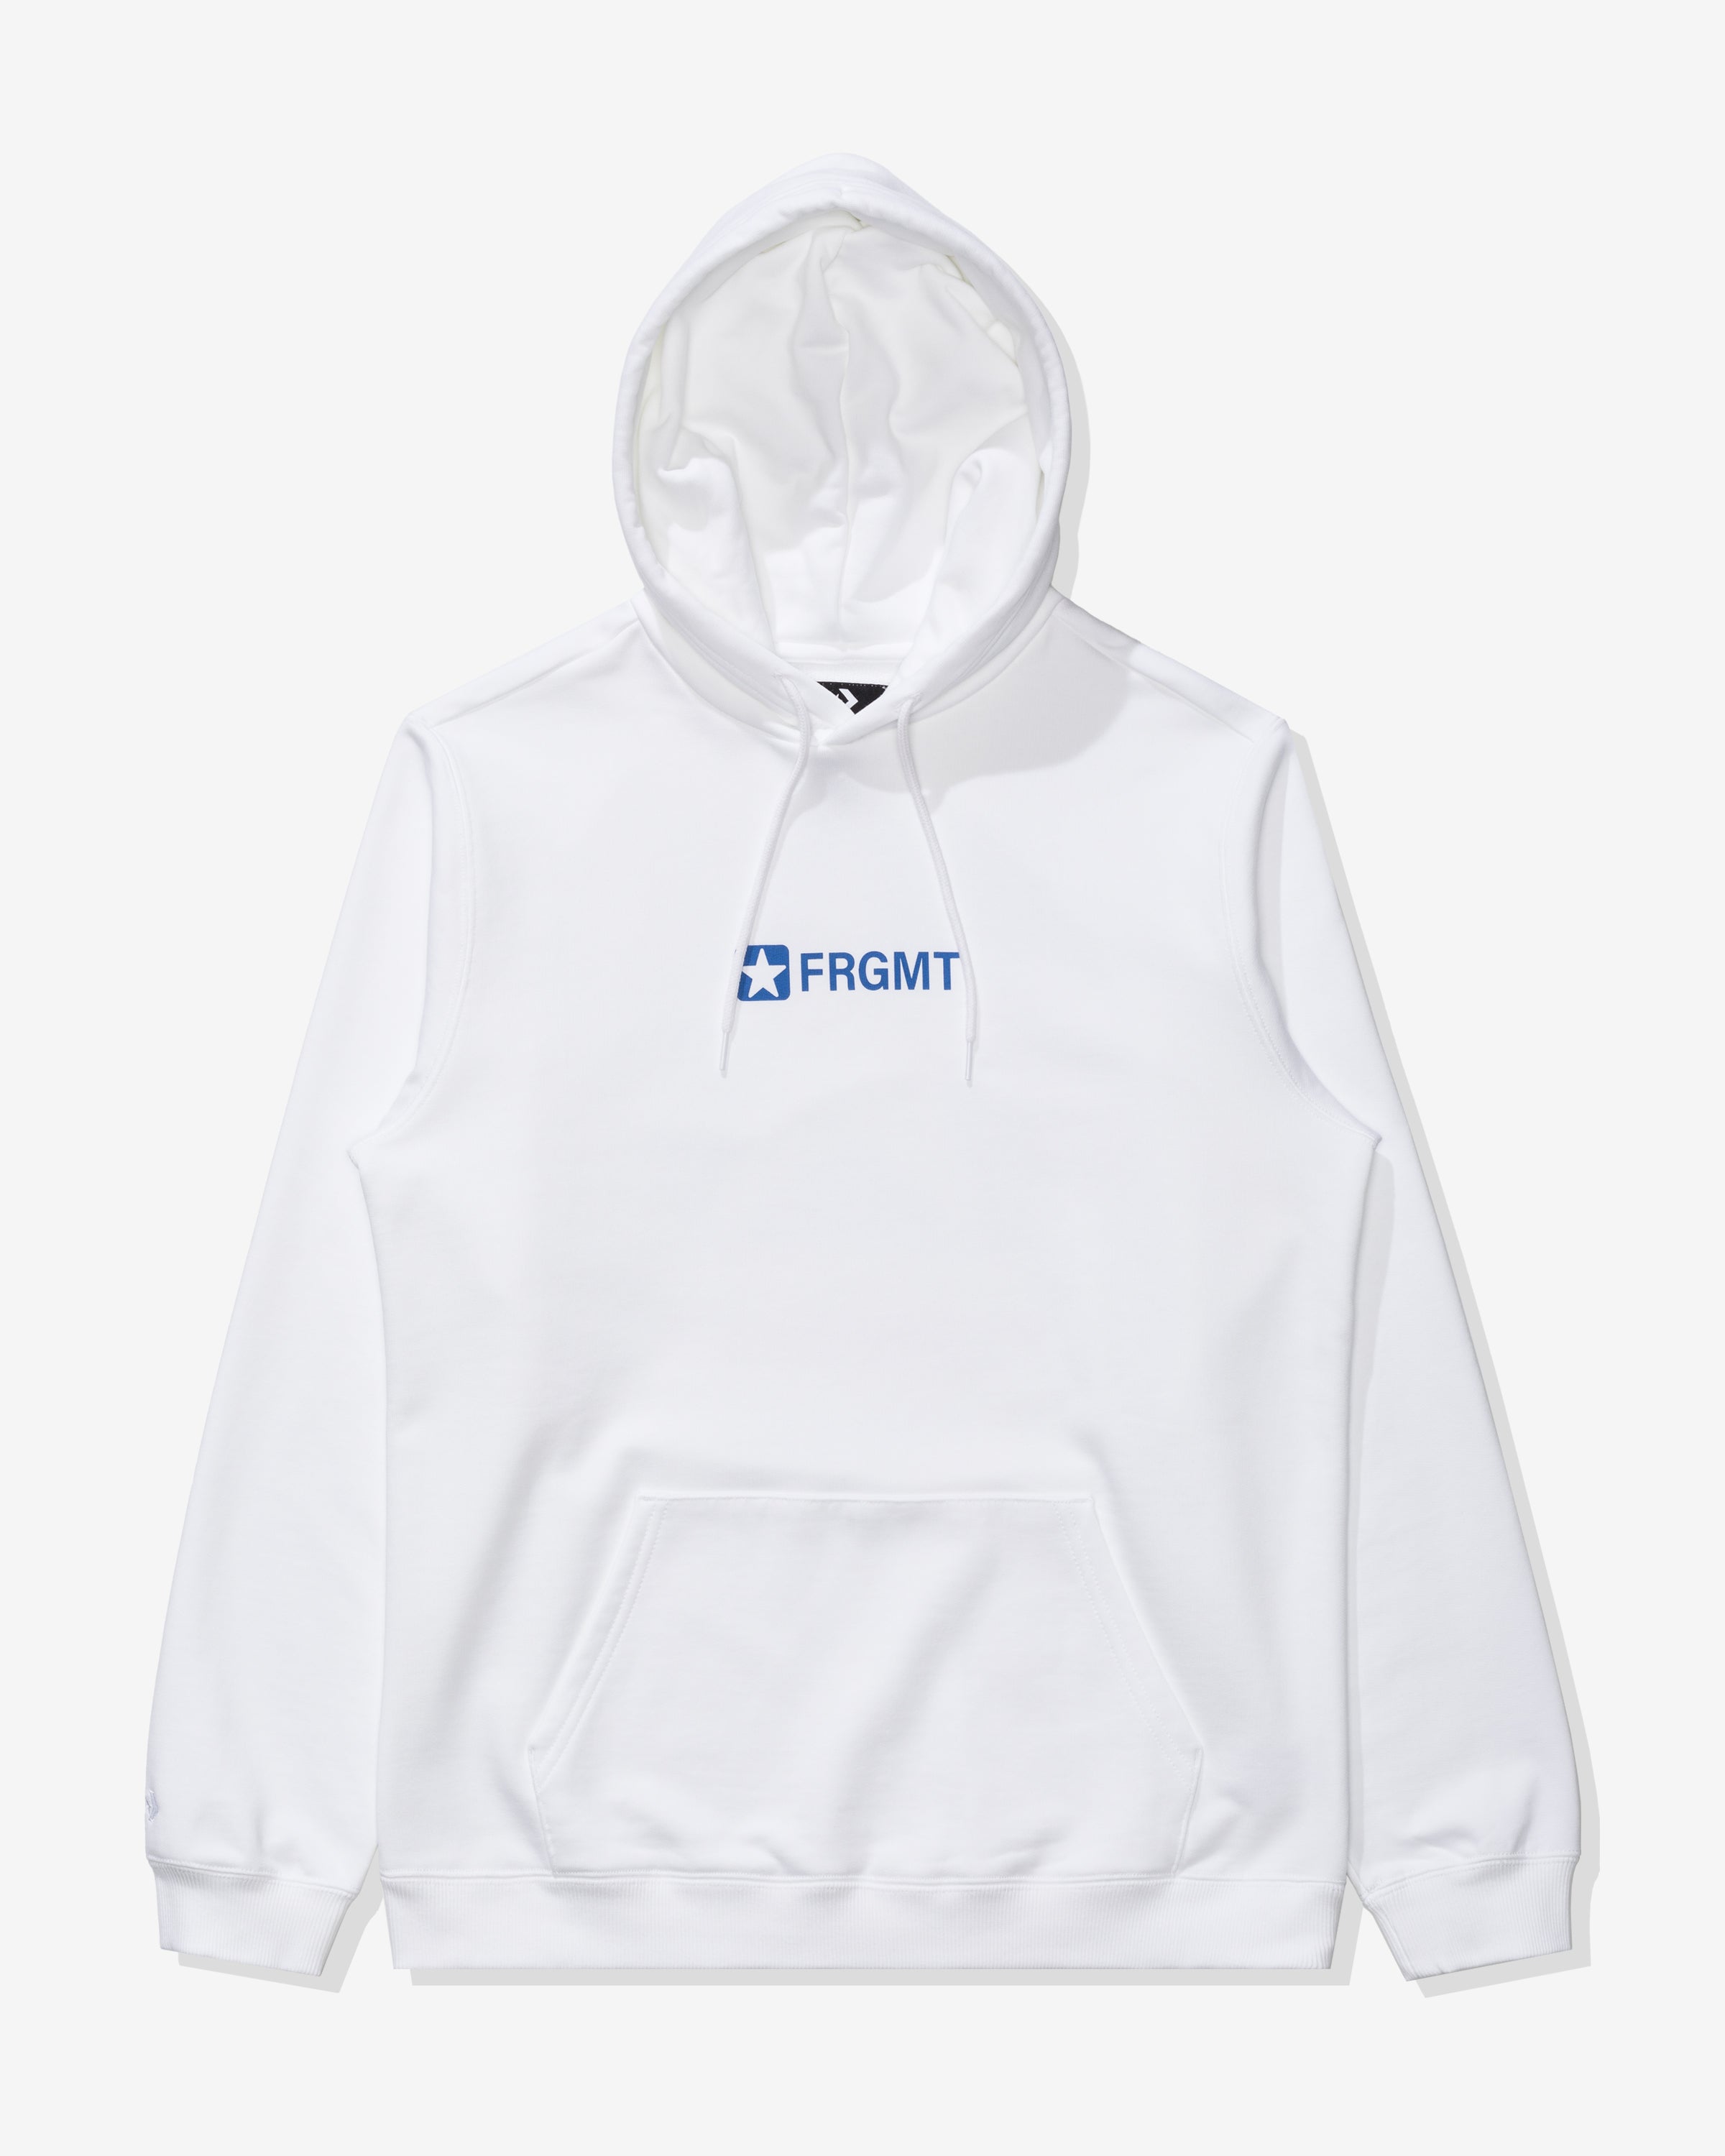 CONVERSE X FRAGMENT HOODIE - WHITE – Undefeated